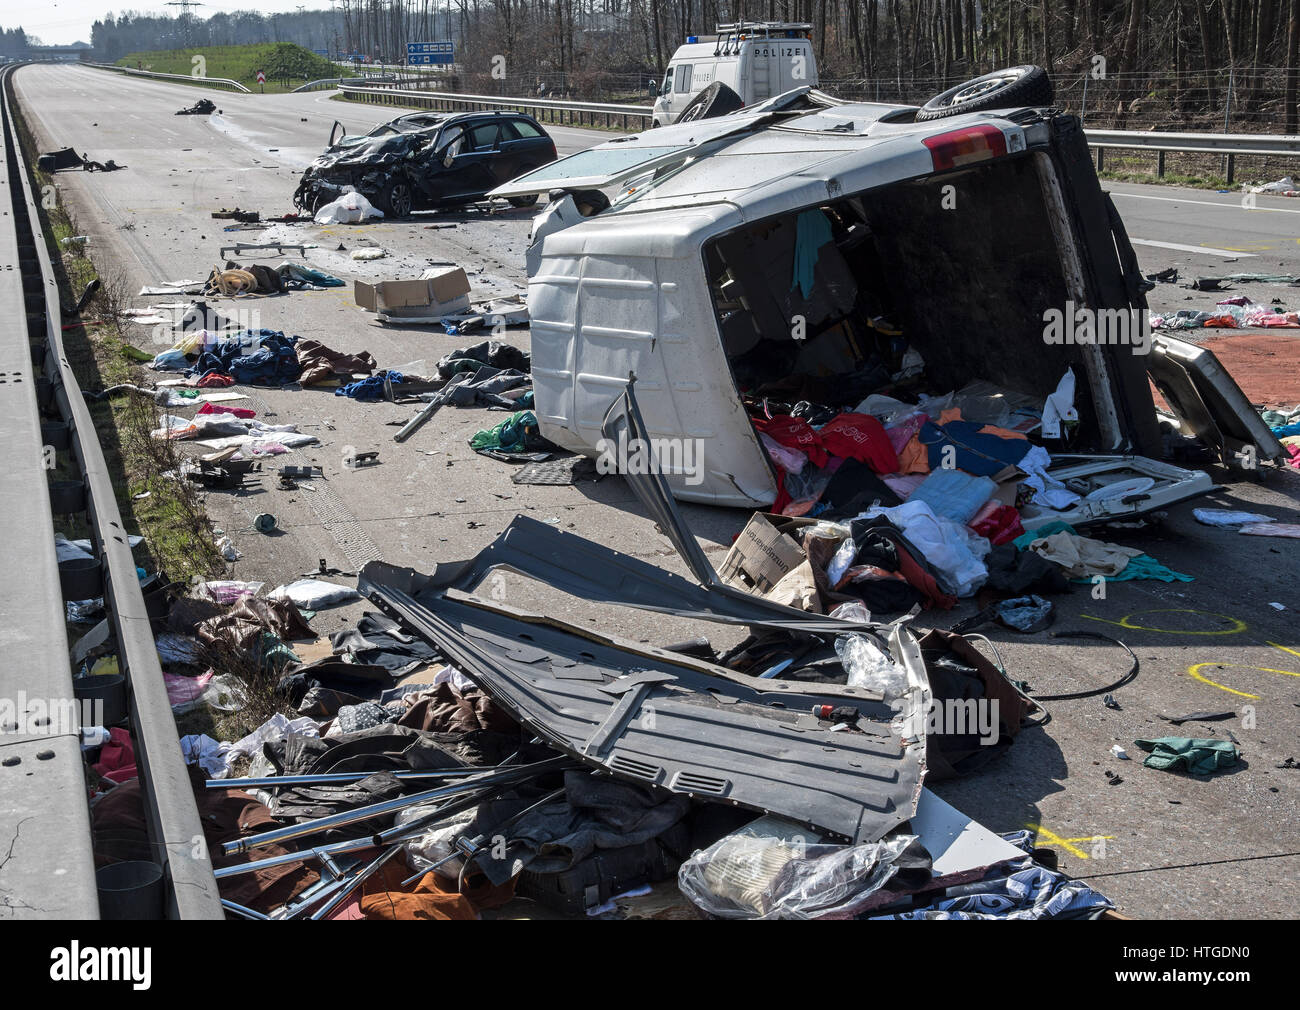 Cloppenburg, Germany. 11th Mar, 2017. The scene of a multi-car pile-up on the A1 motorway near Cloppenburg, Germany, 11 March 2017. A white van tipped onto its side after colliding with a truck and sliding onto the passing lane before being rammed by a black station wagon. The driver of the car as well as the two passengers in the van died at the scene. Photo: Ingo Wagner/dpa/Alamy Live News Stock Photo